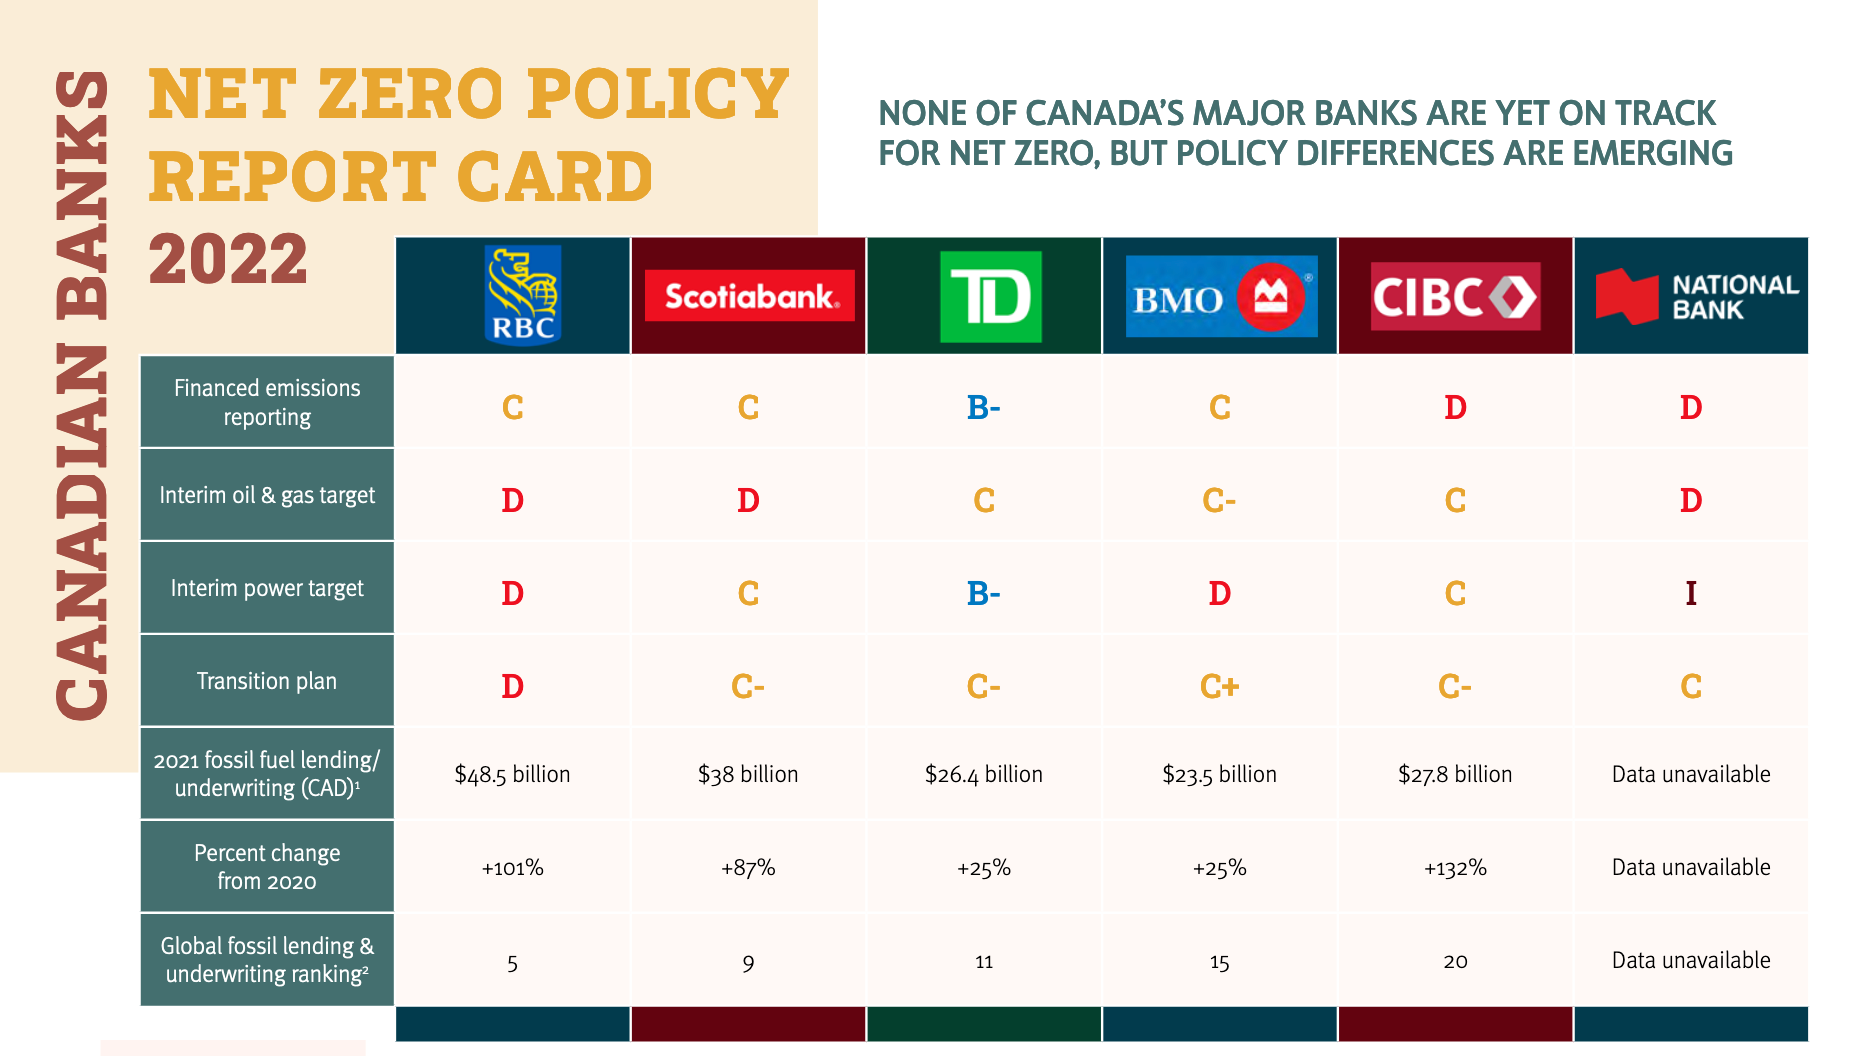 While no Canadian banks will get to NetZero, RBC is the worst